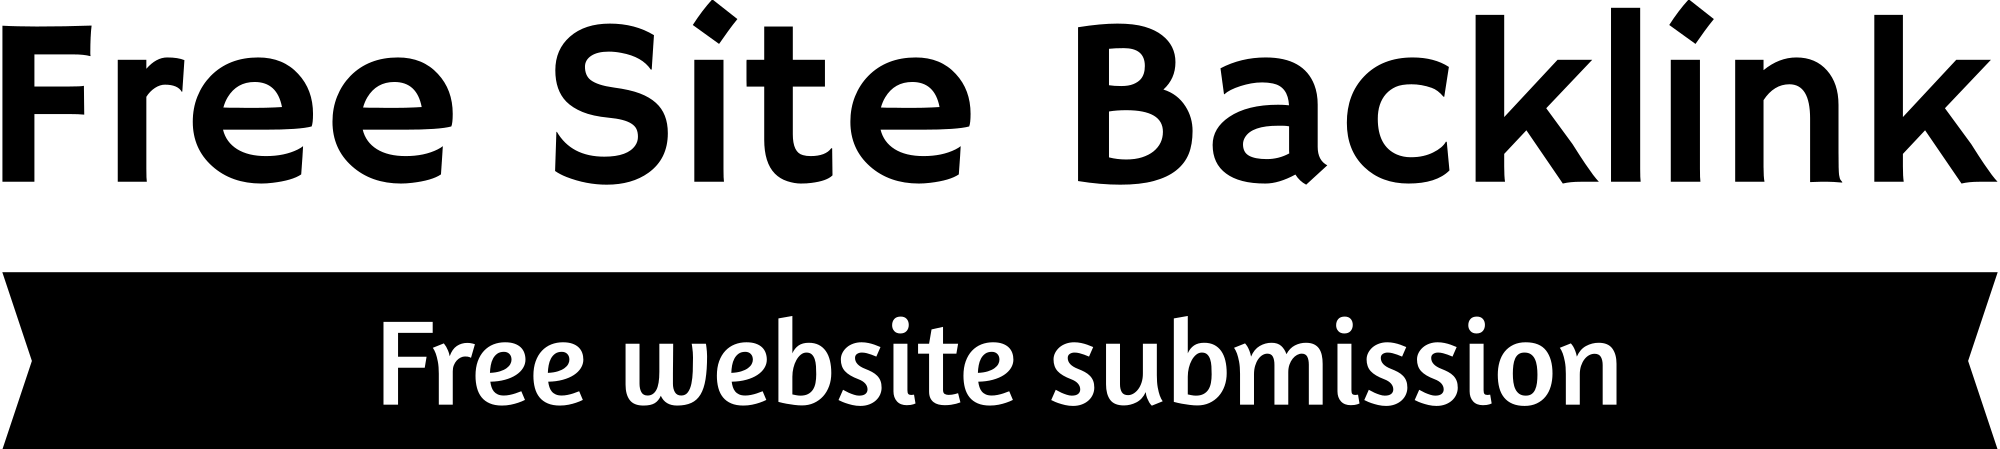 Free Site Backlink | Free Directory Submission